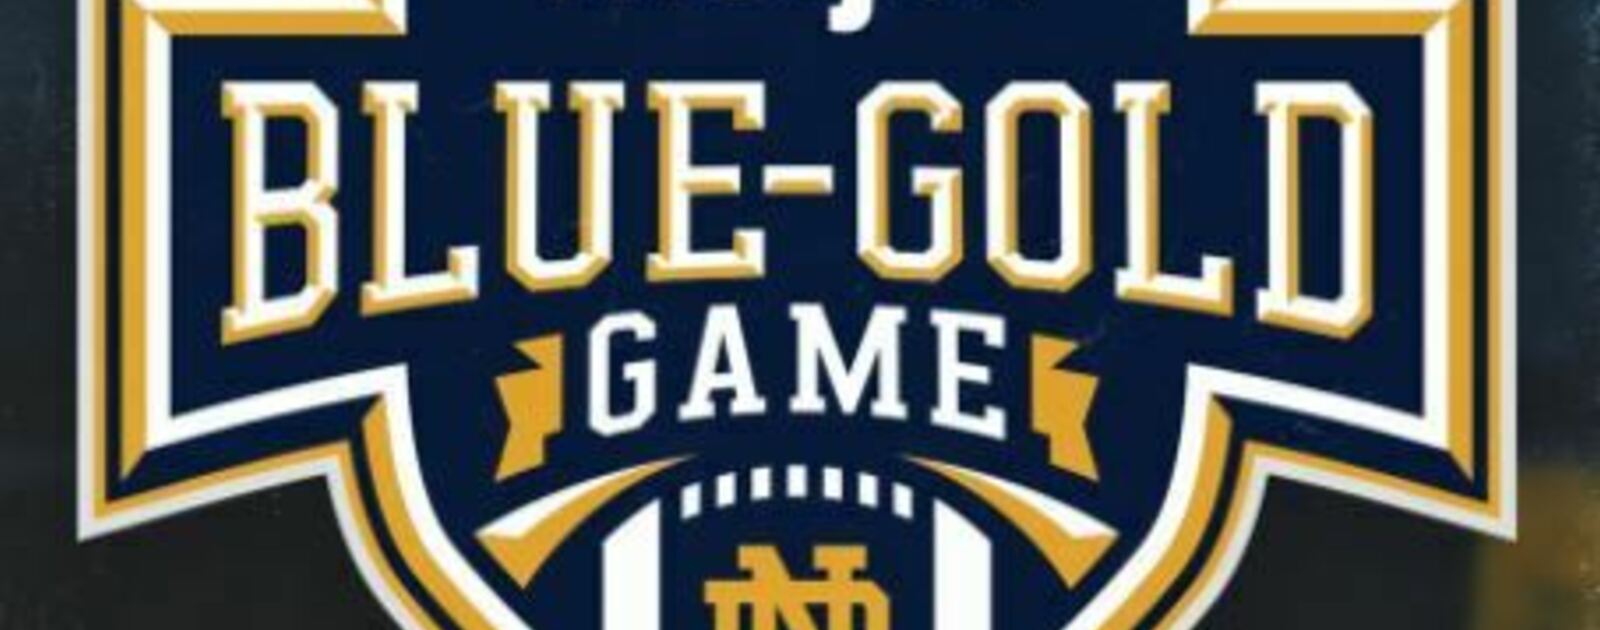 Annual BlueGold Game (ND football spring scrimmage) 20220423